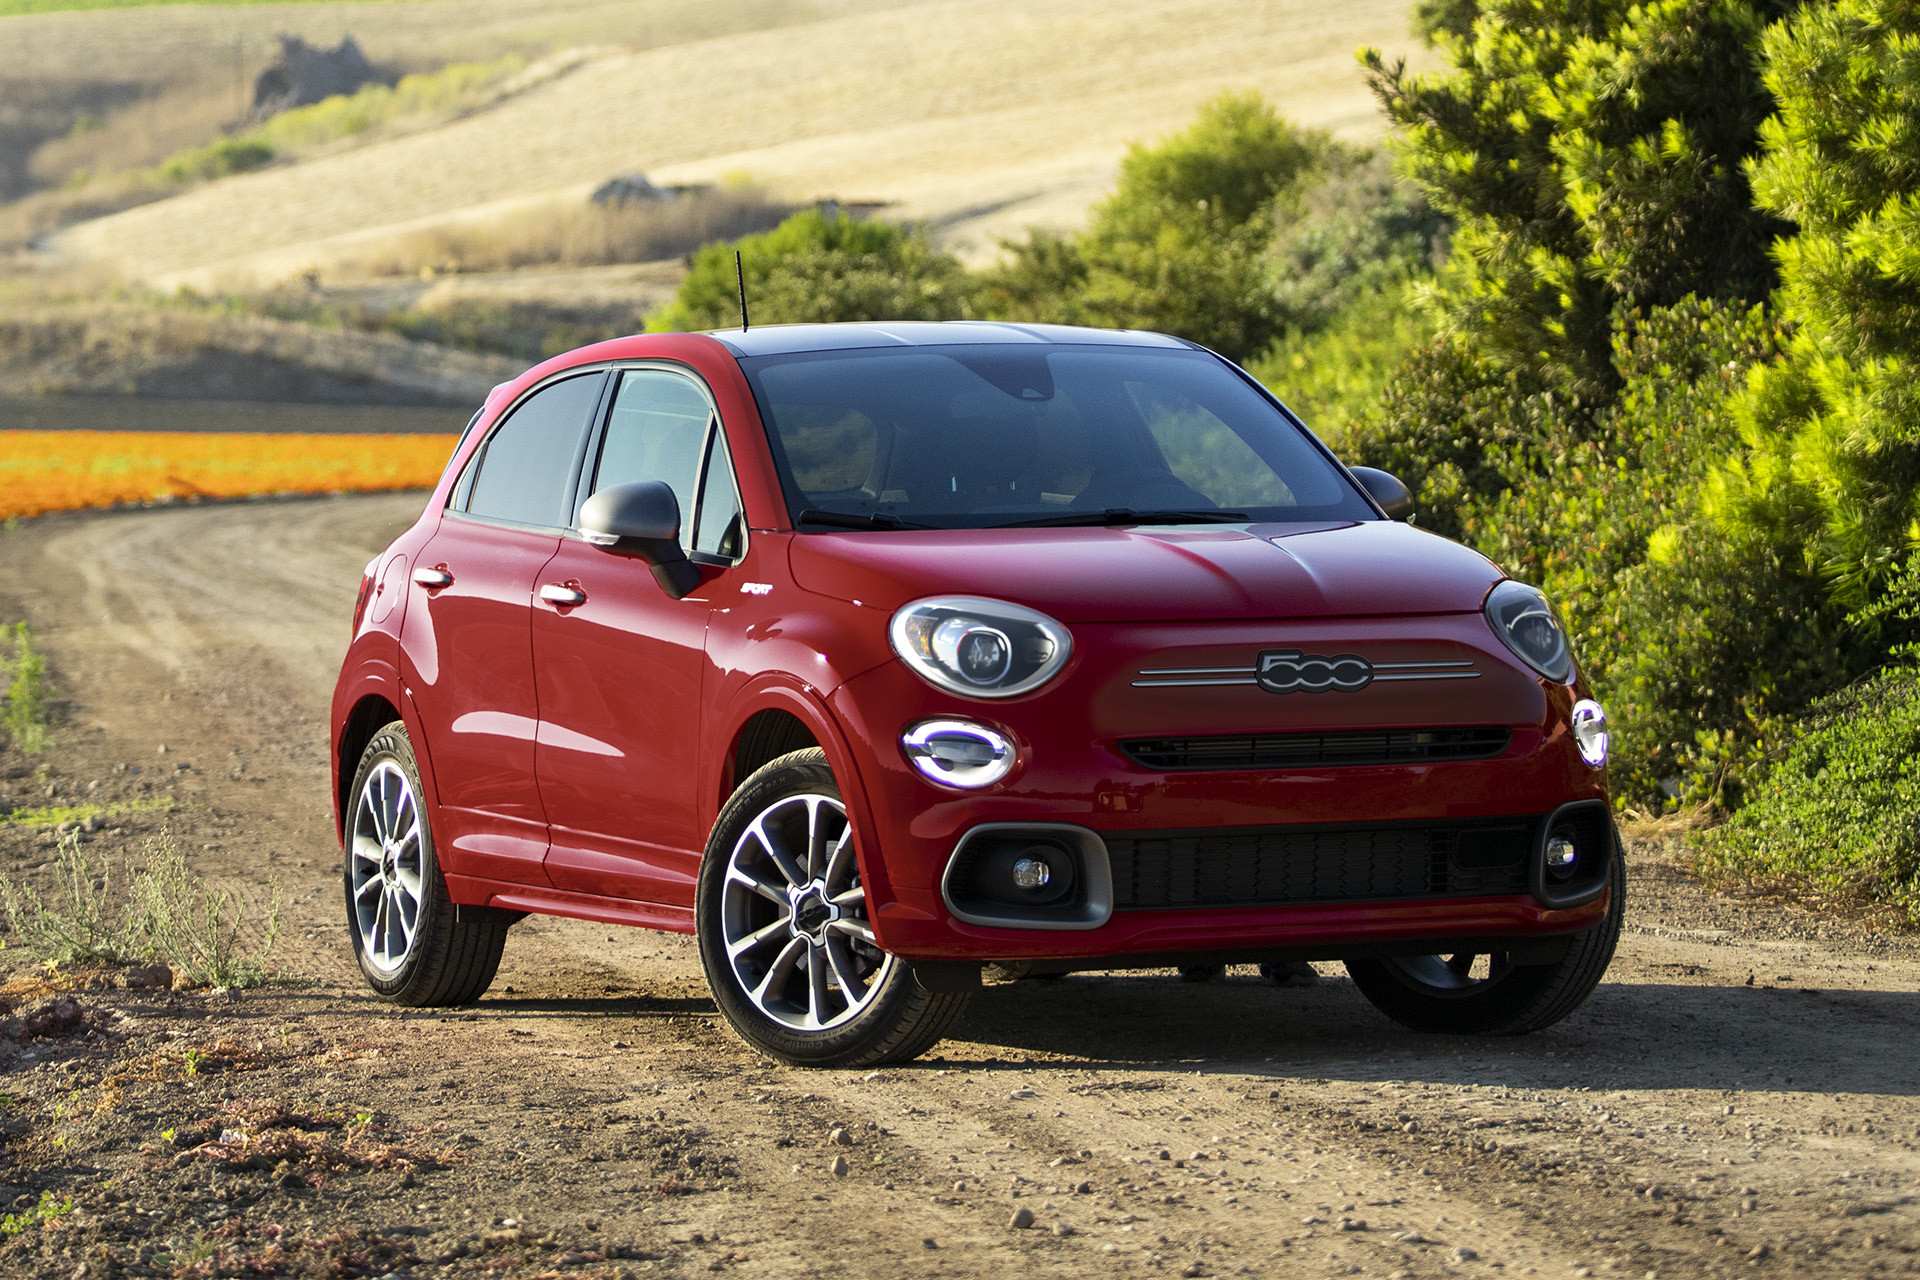 Front view of a red 2023 Fiat 500X parked on a dirt road with vast land and trees in the background.